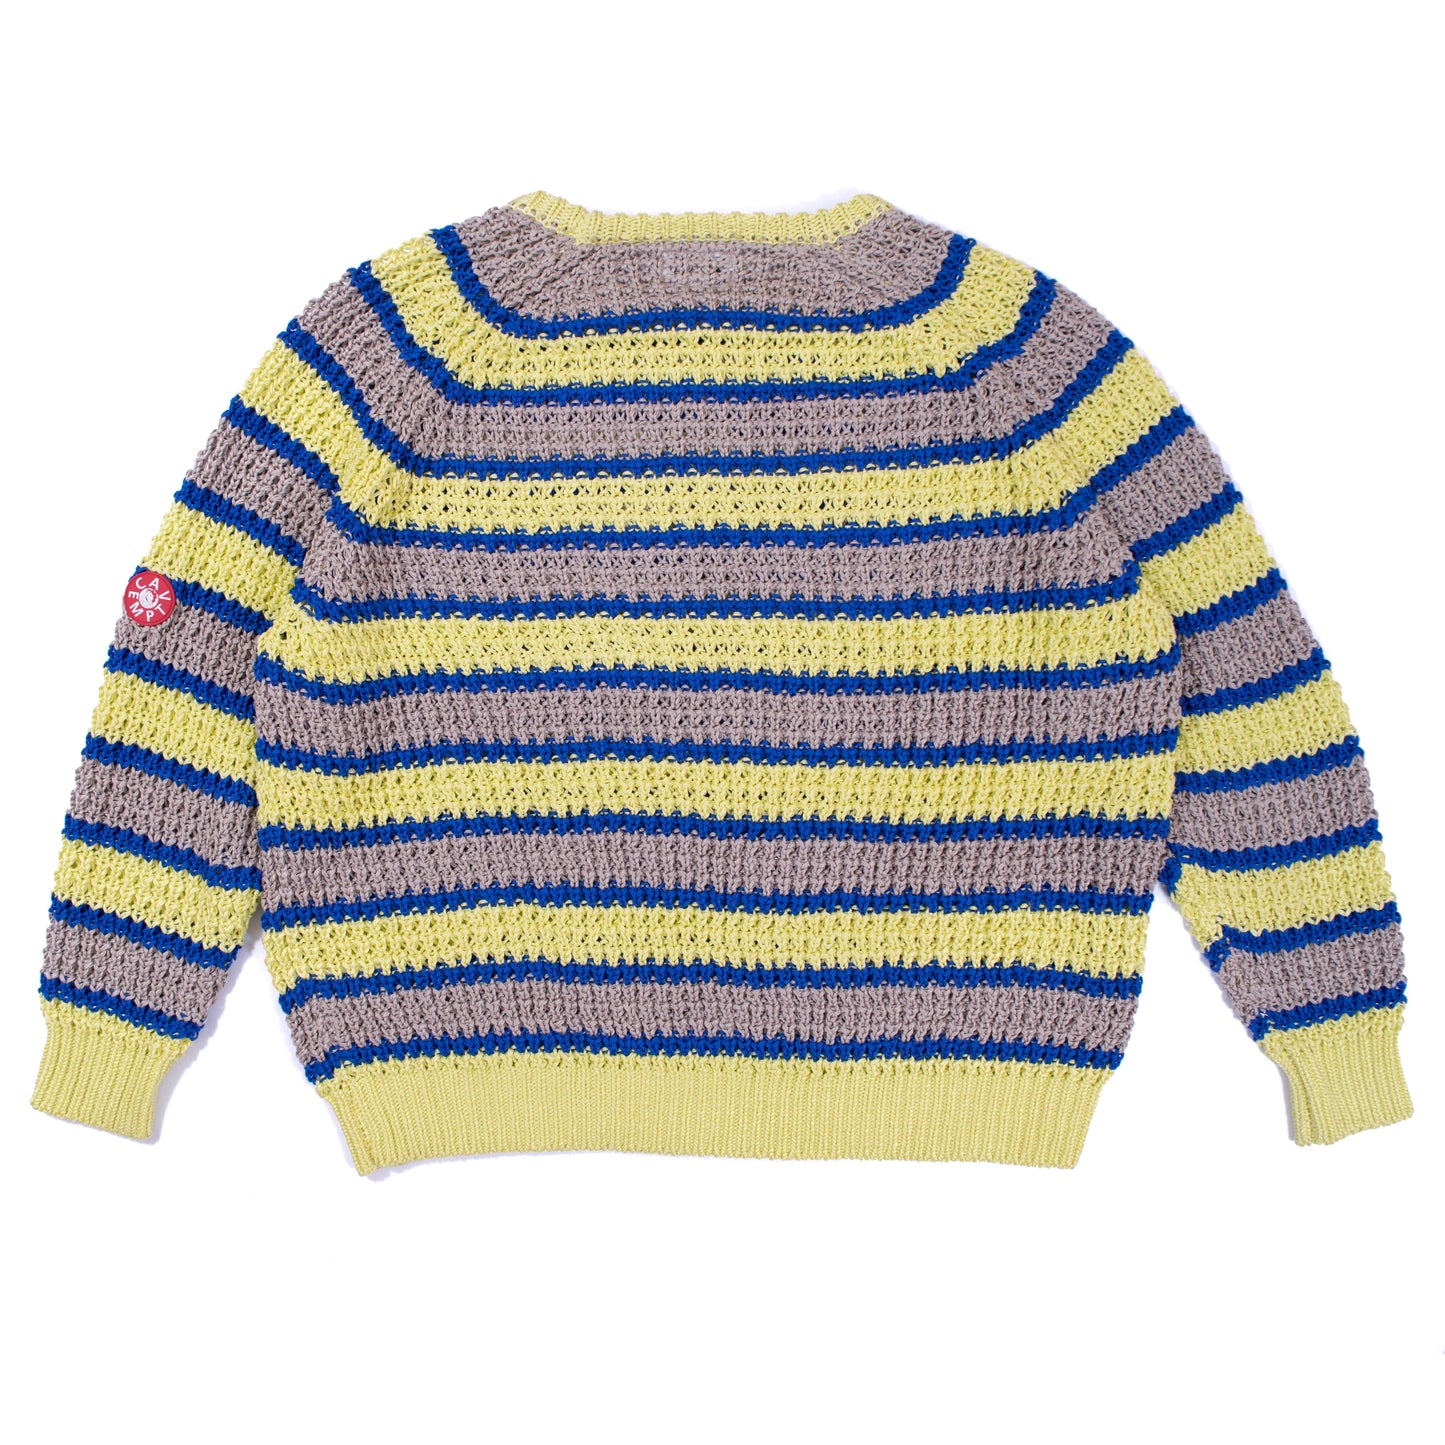 Cav Empt Stripe Loose Waffle Knit #2 (2018AW)